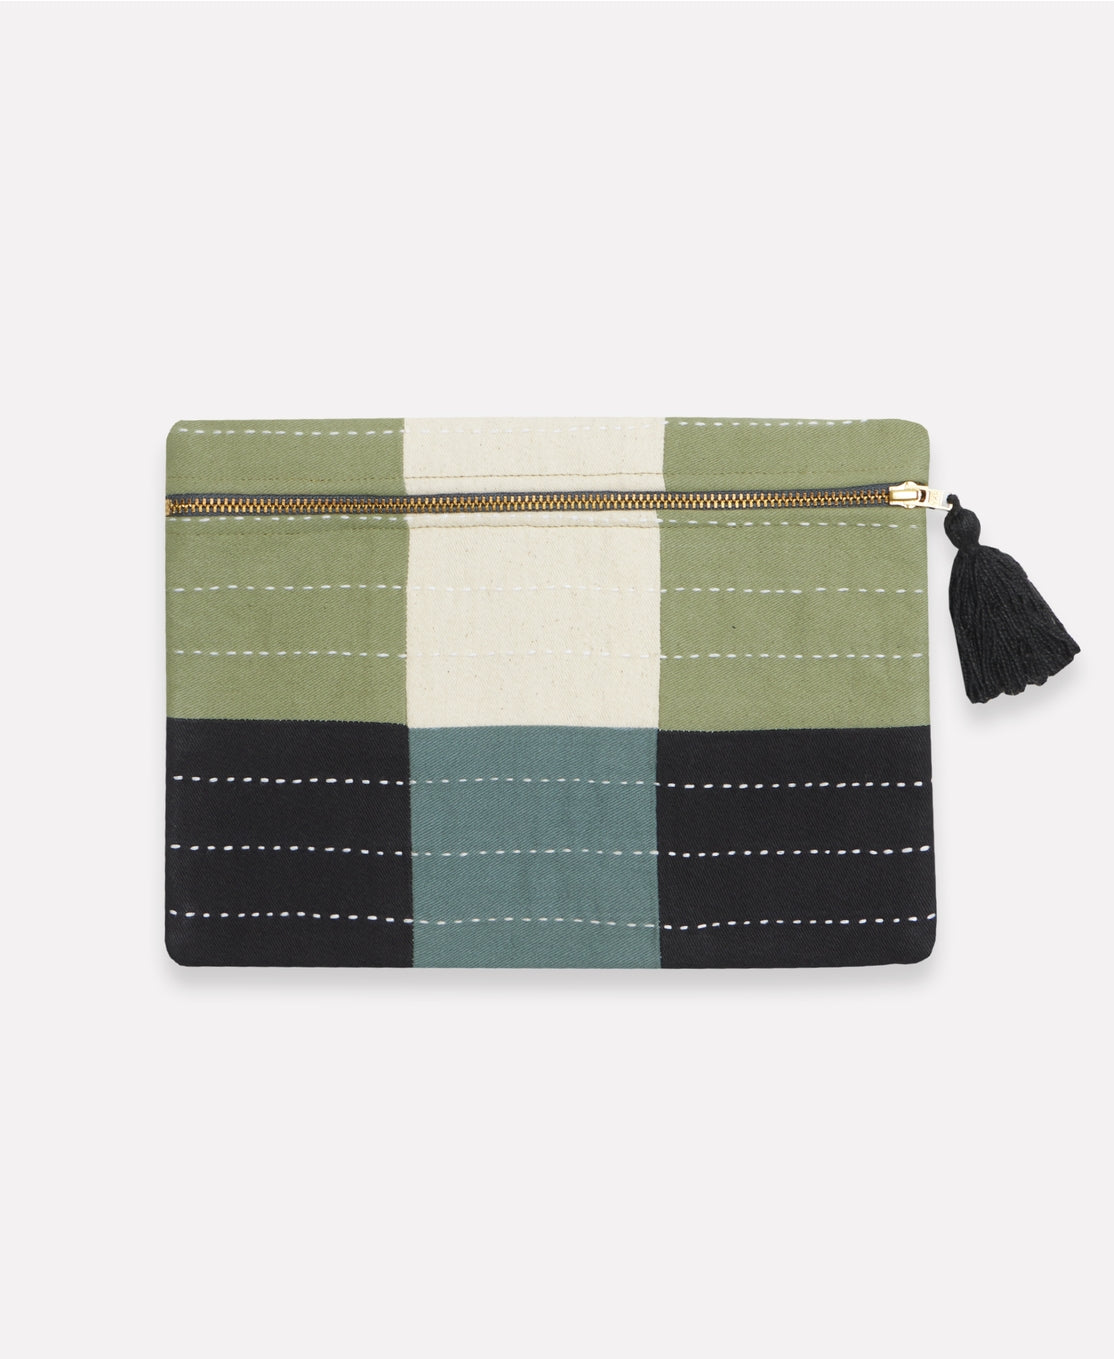 This beautiful contemporary pouch complete with a tassel zipper pull, features a color block checkered design and charming stitch details. Made with organic cotton, use it to stay organized, store makeup, a cell phone, or important receipts.